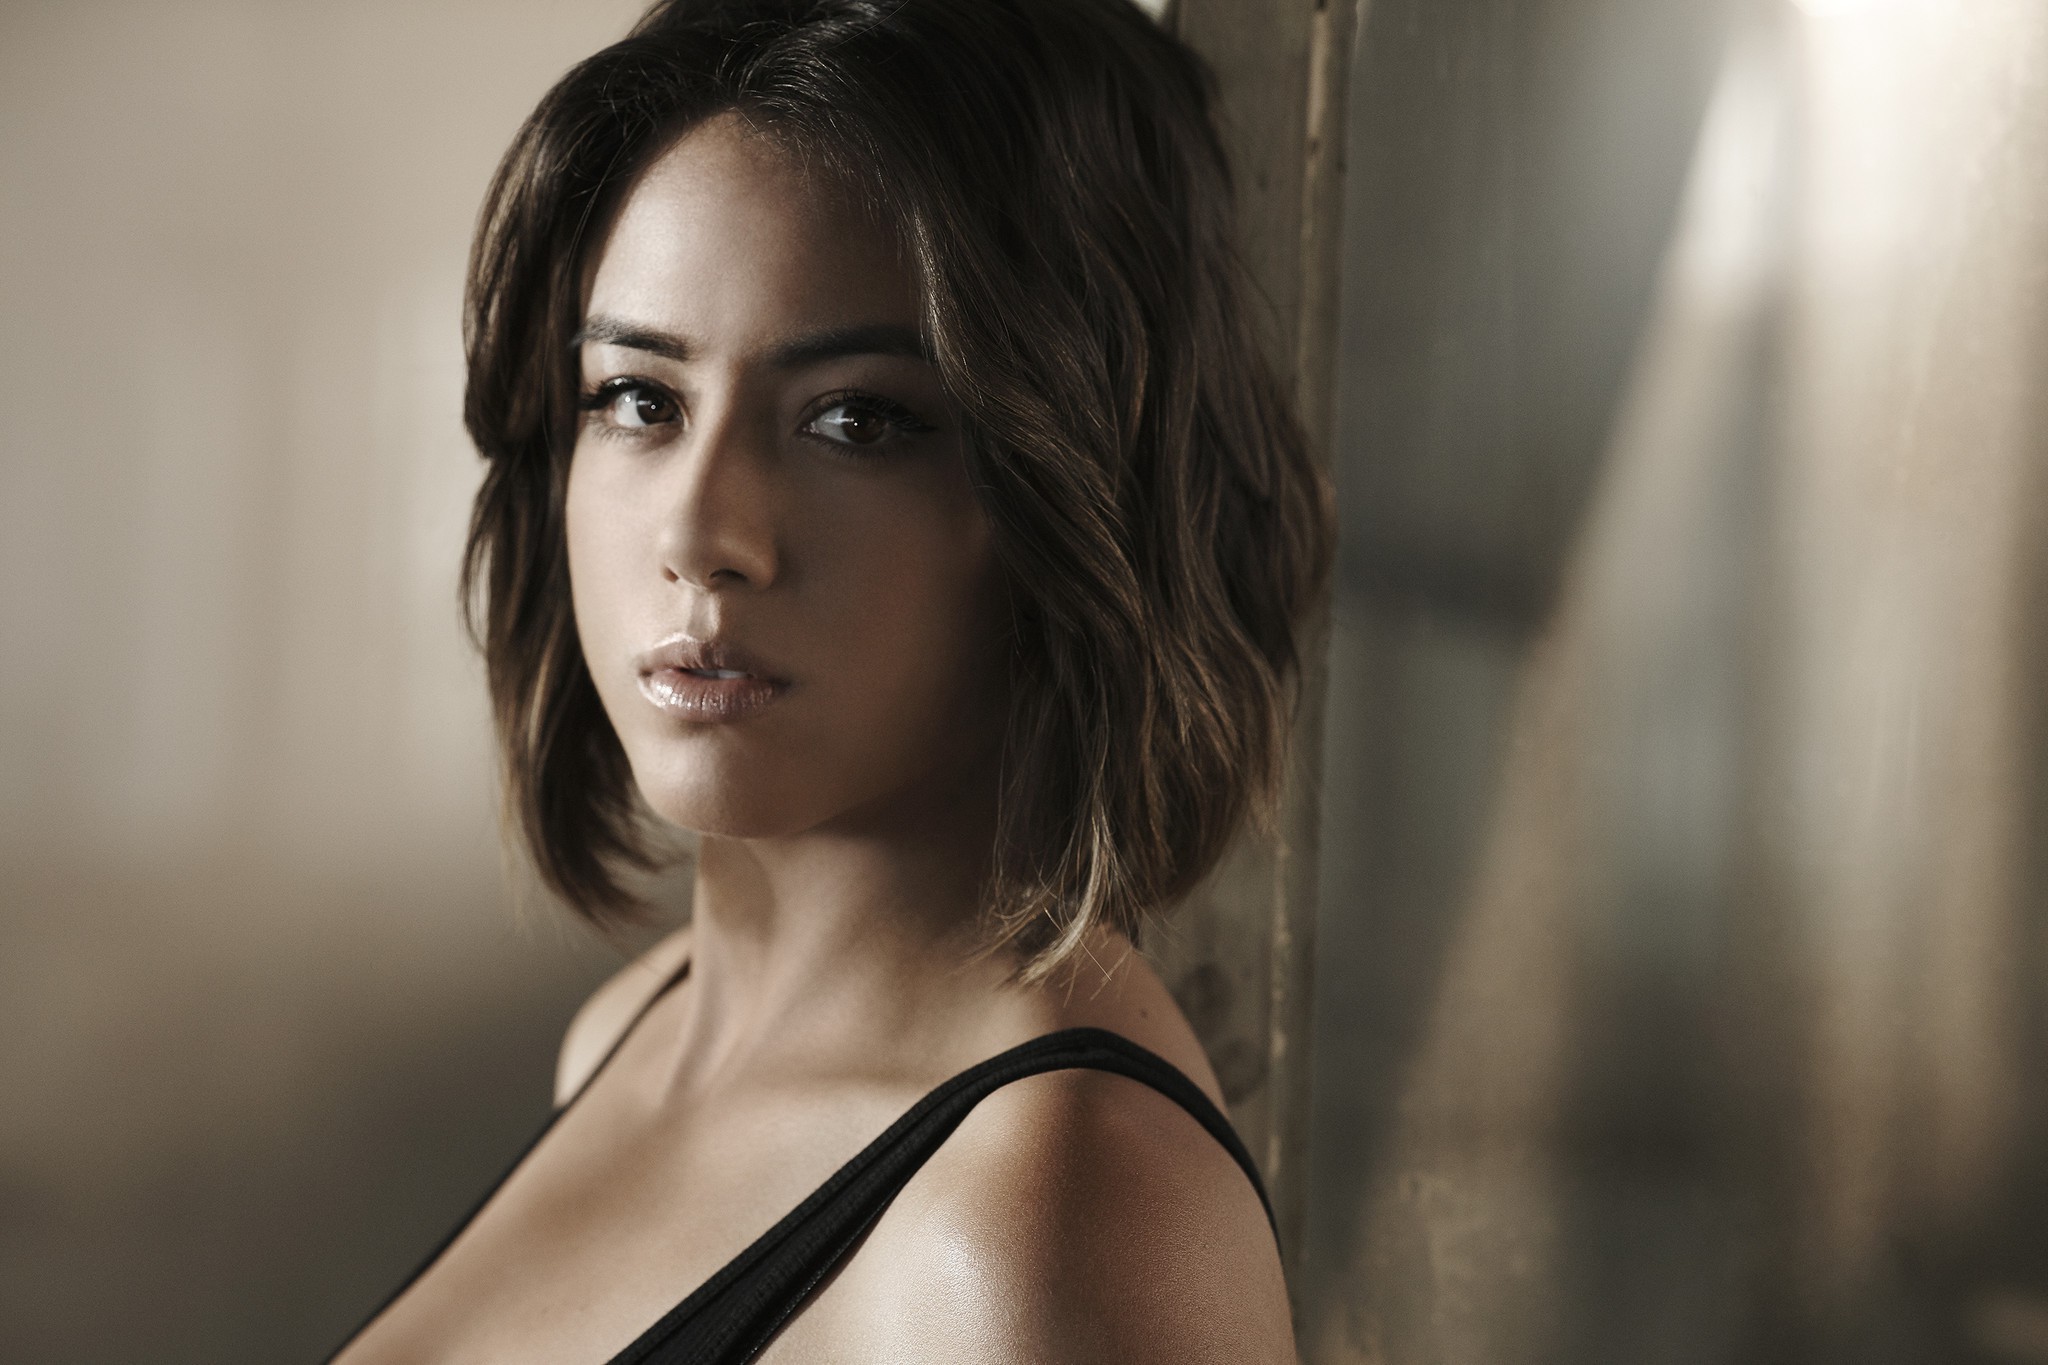 women, Actress, Brunette, Long Hair, Chloe Bennet, Open Mouth, Looking At Viewer, Tank Top, Bare Shoulders, Depth Of Field, Brown Eyes, Face, Agents Of S.H.I.E.L.D. Wallpaper